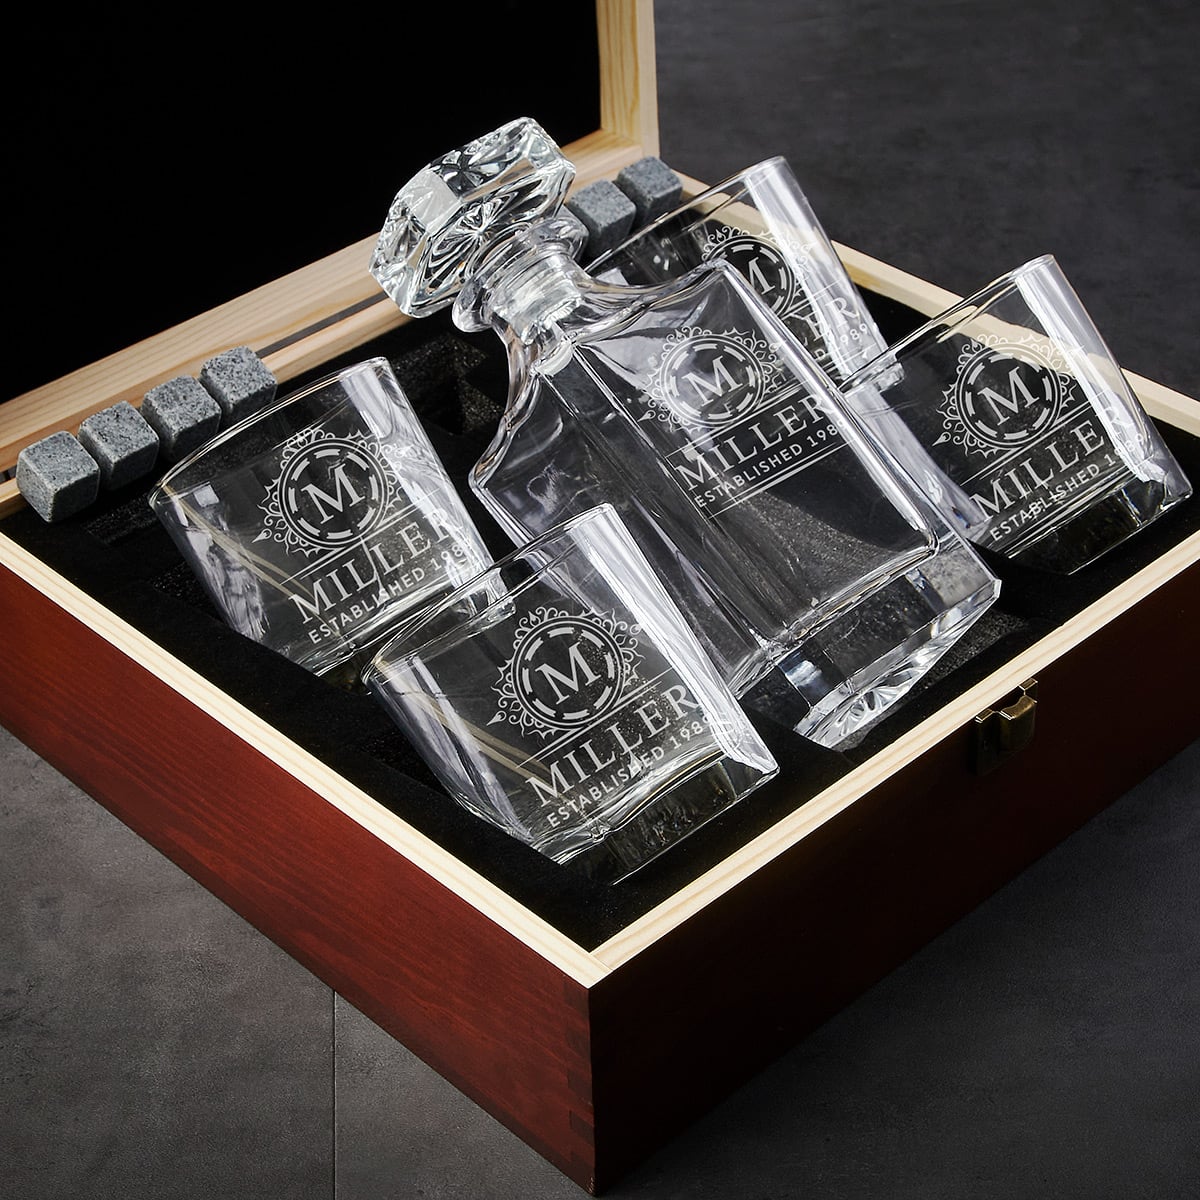 Prescott Whiskey Gift Set  7pc - Custom Decanter Set with Handcrafted Box